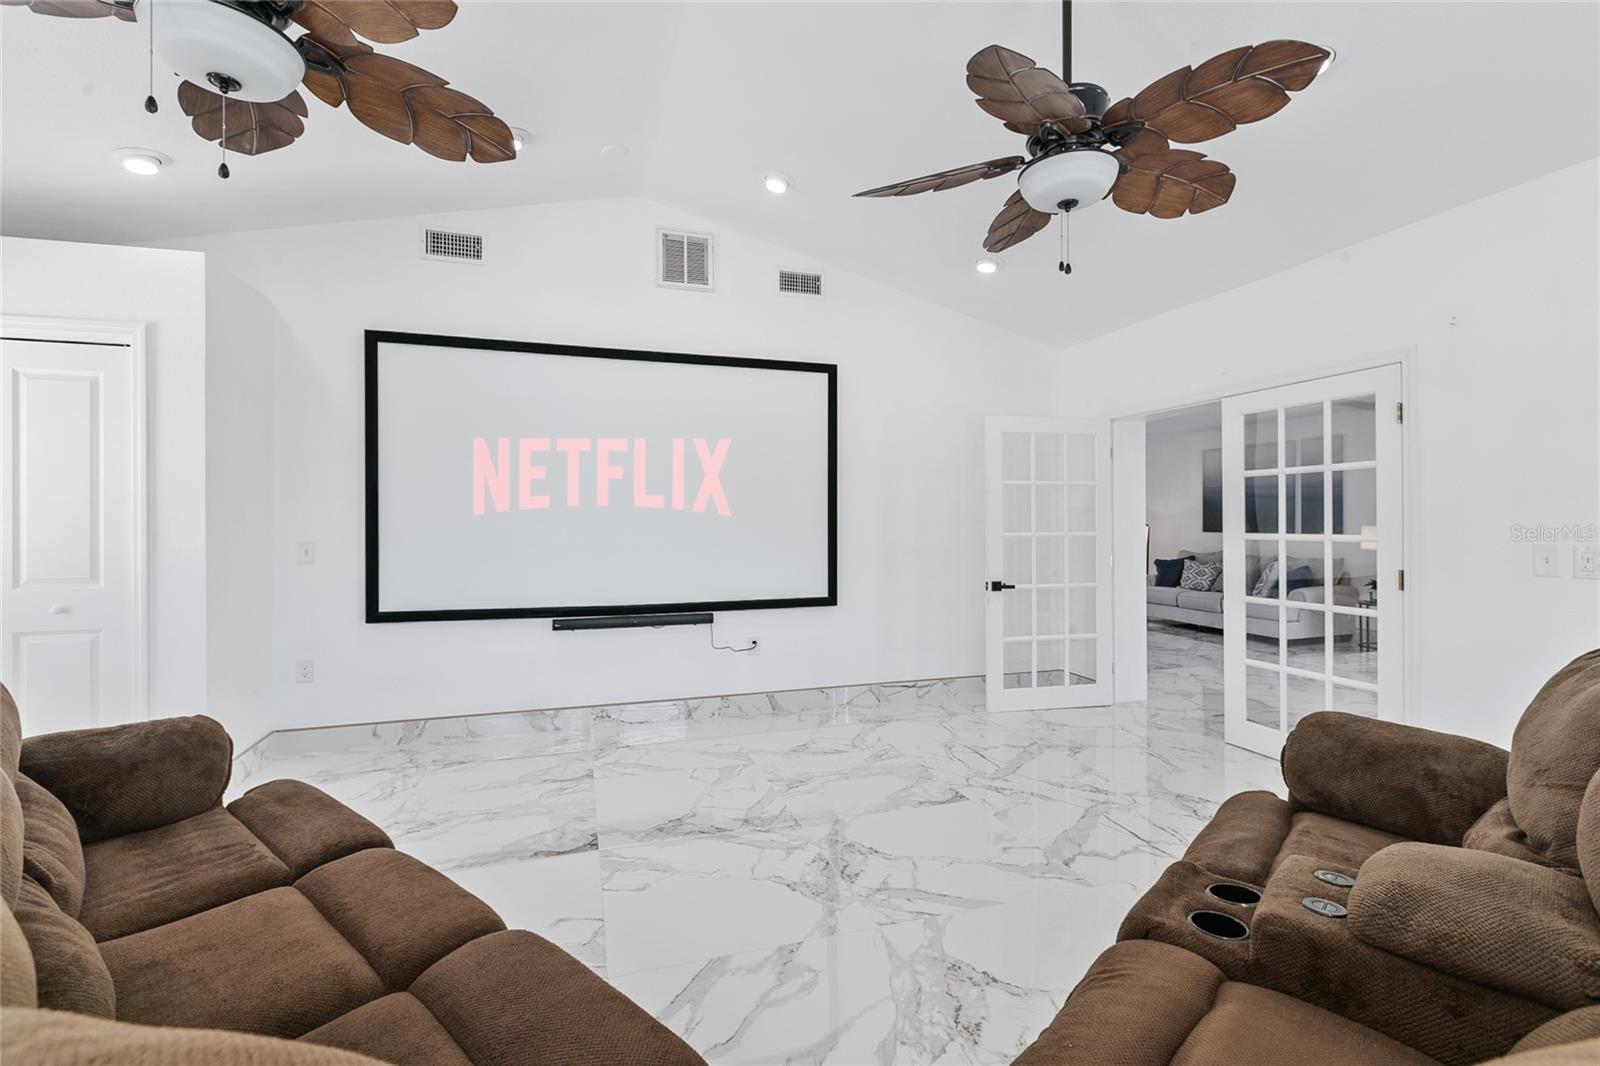 3 Bedroom/Home theater